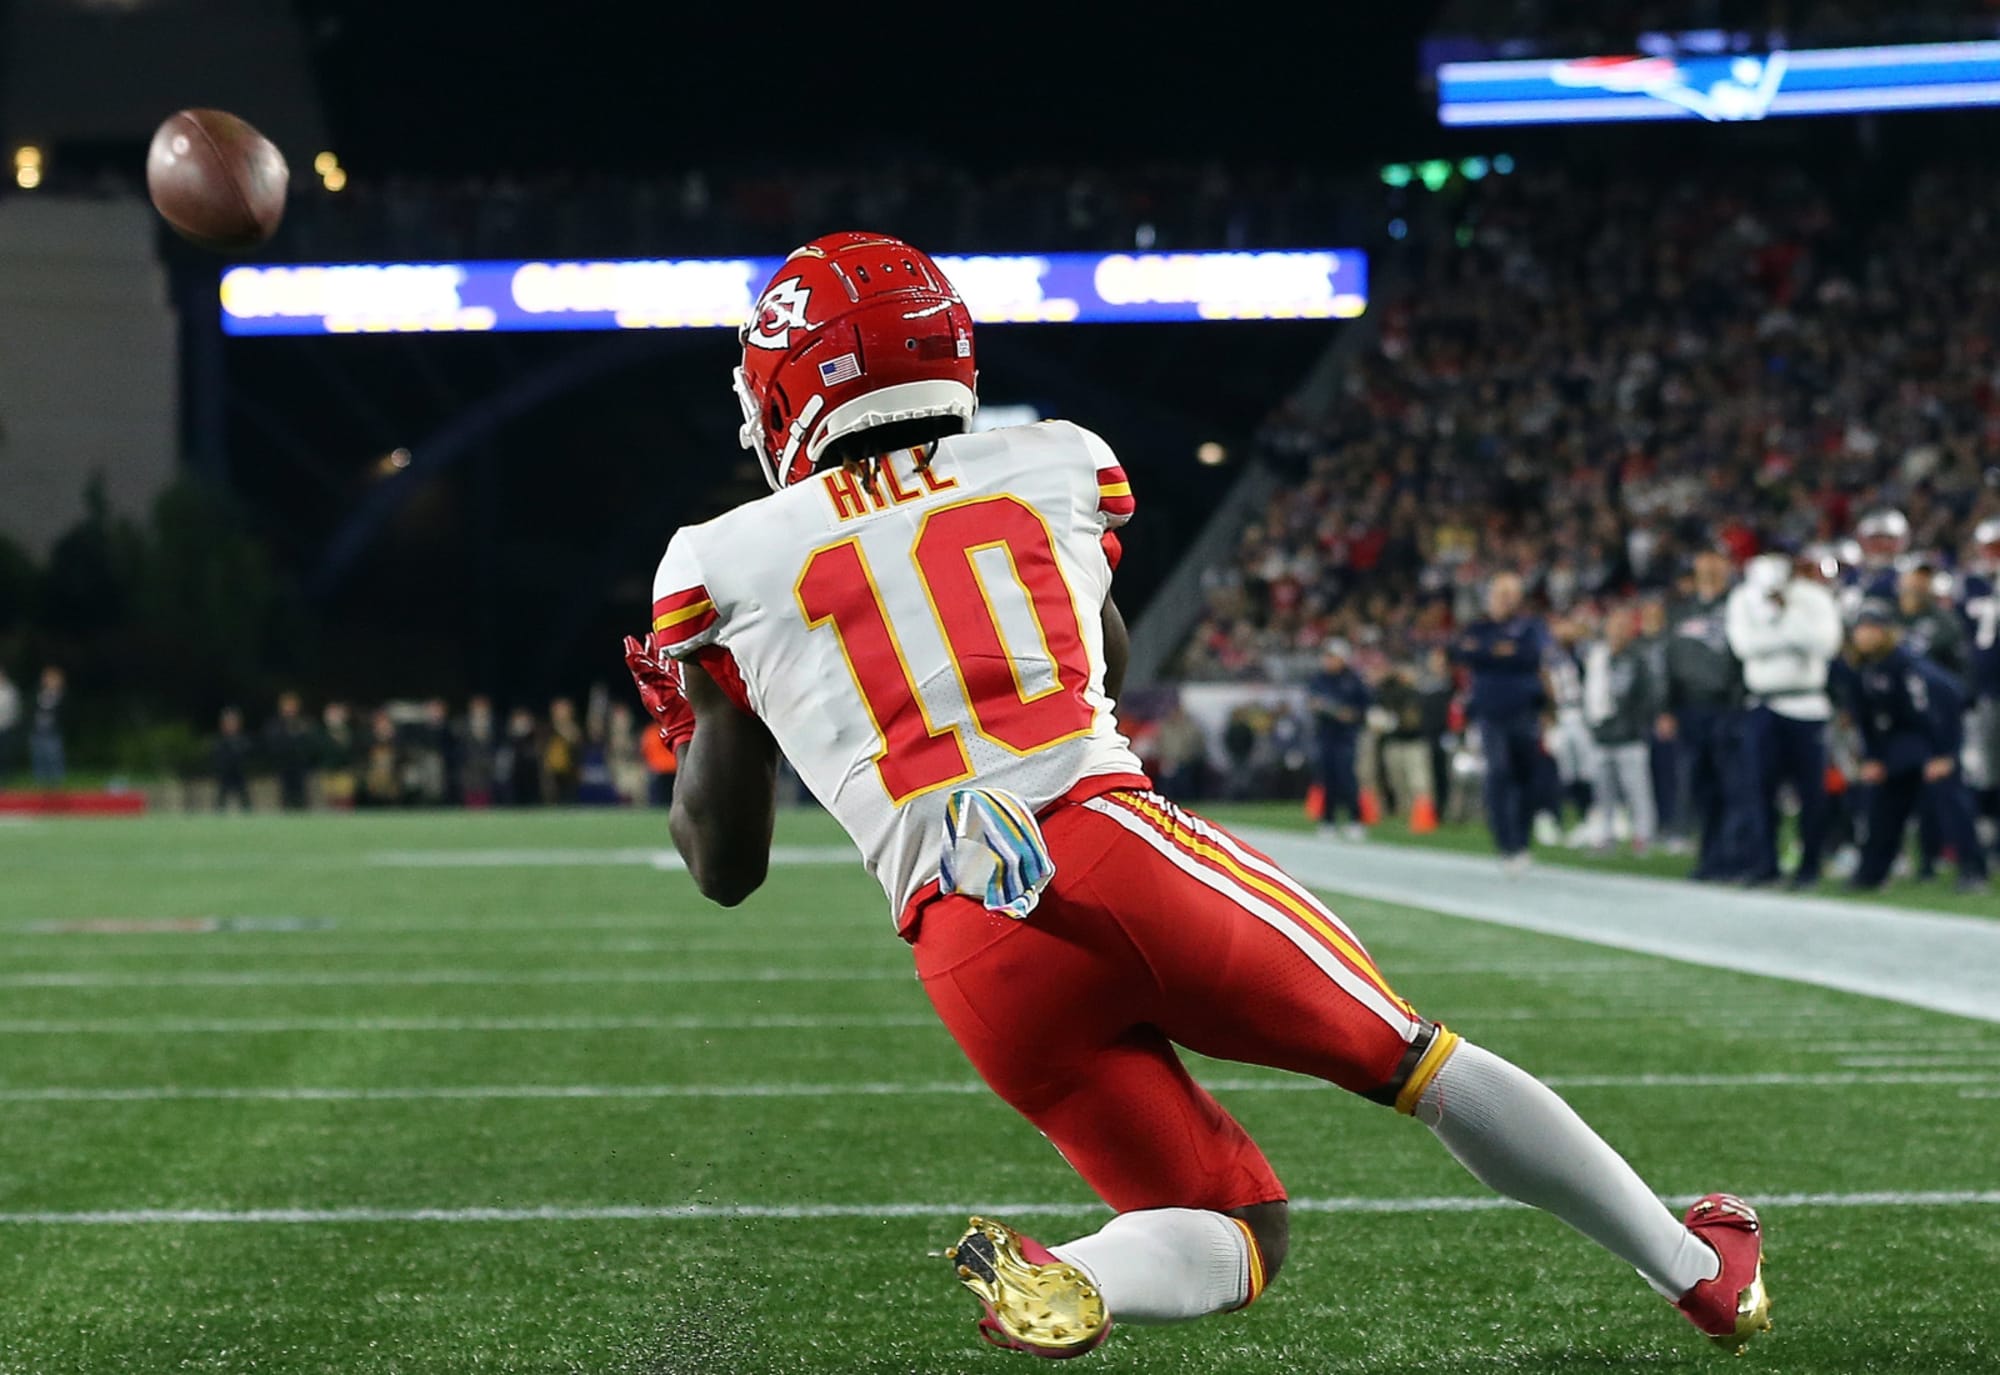 Tyreek Hill deserves Pro Bowl recognition as a wide receiver